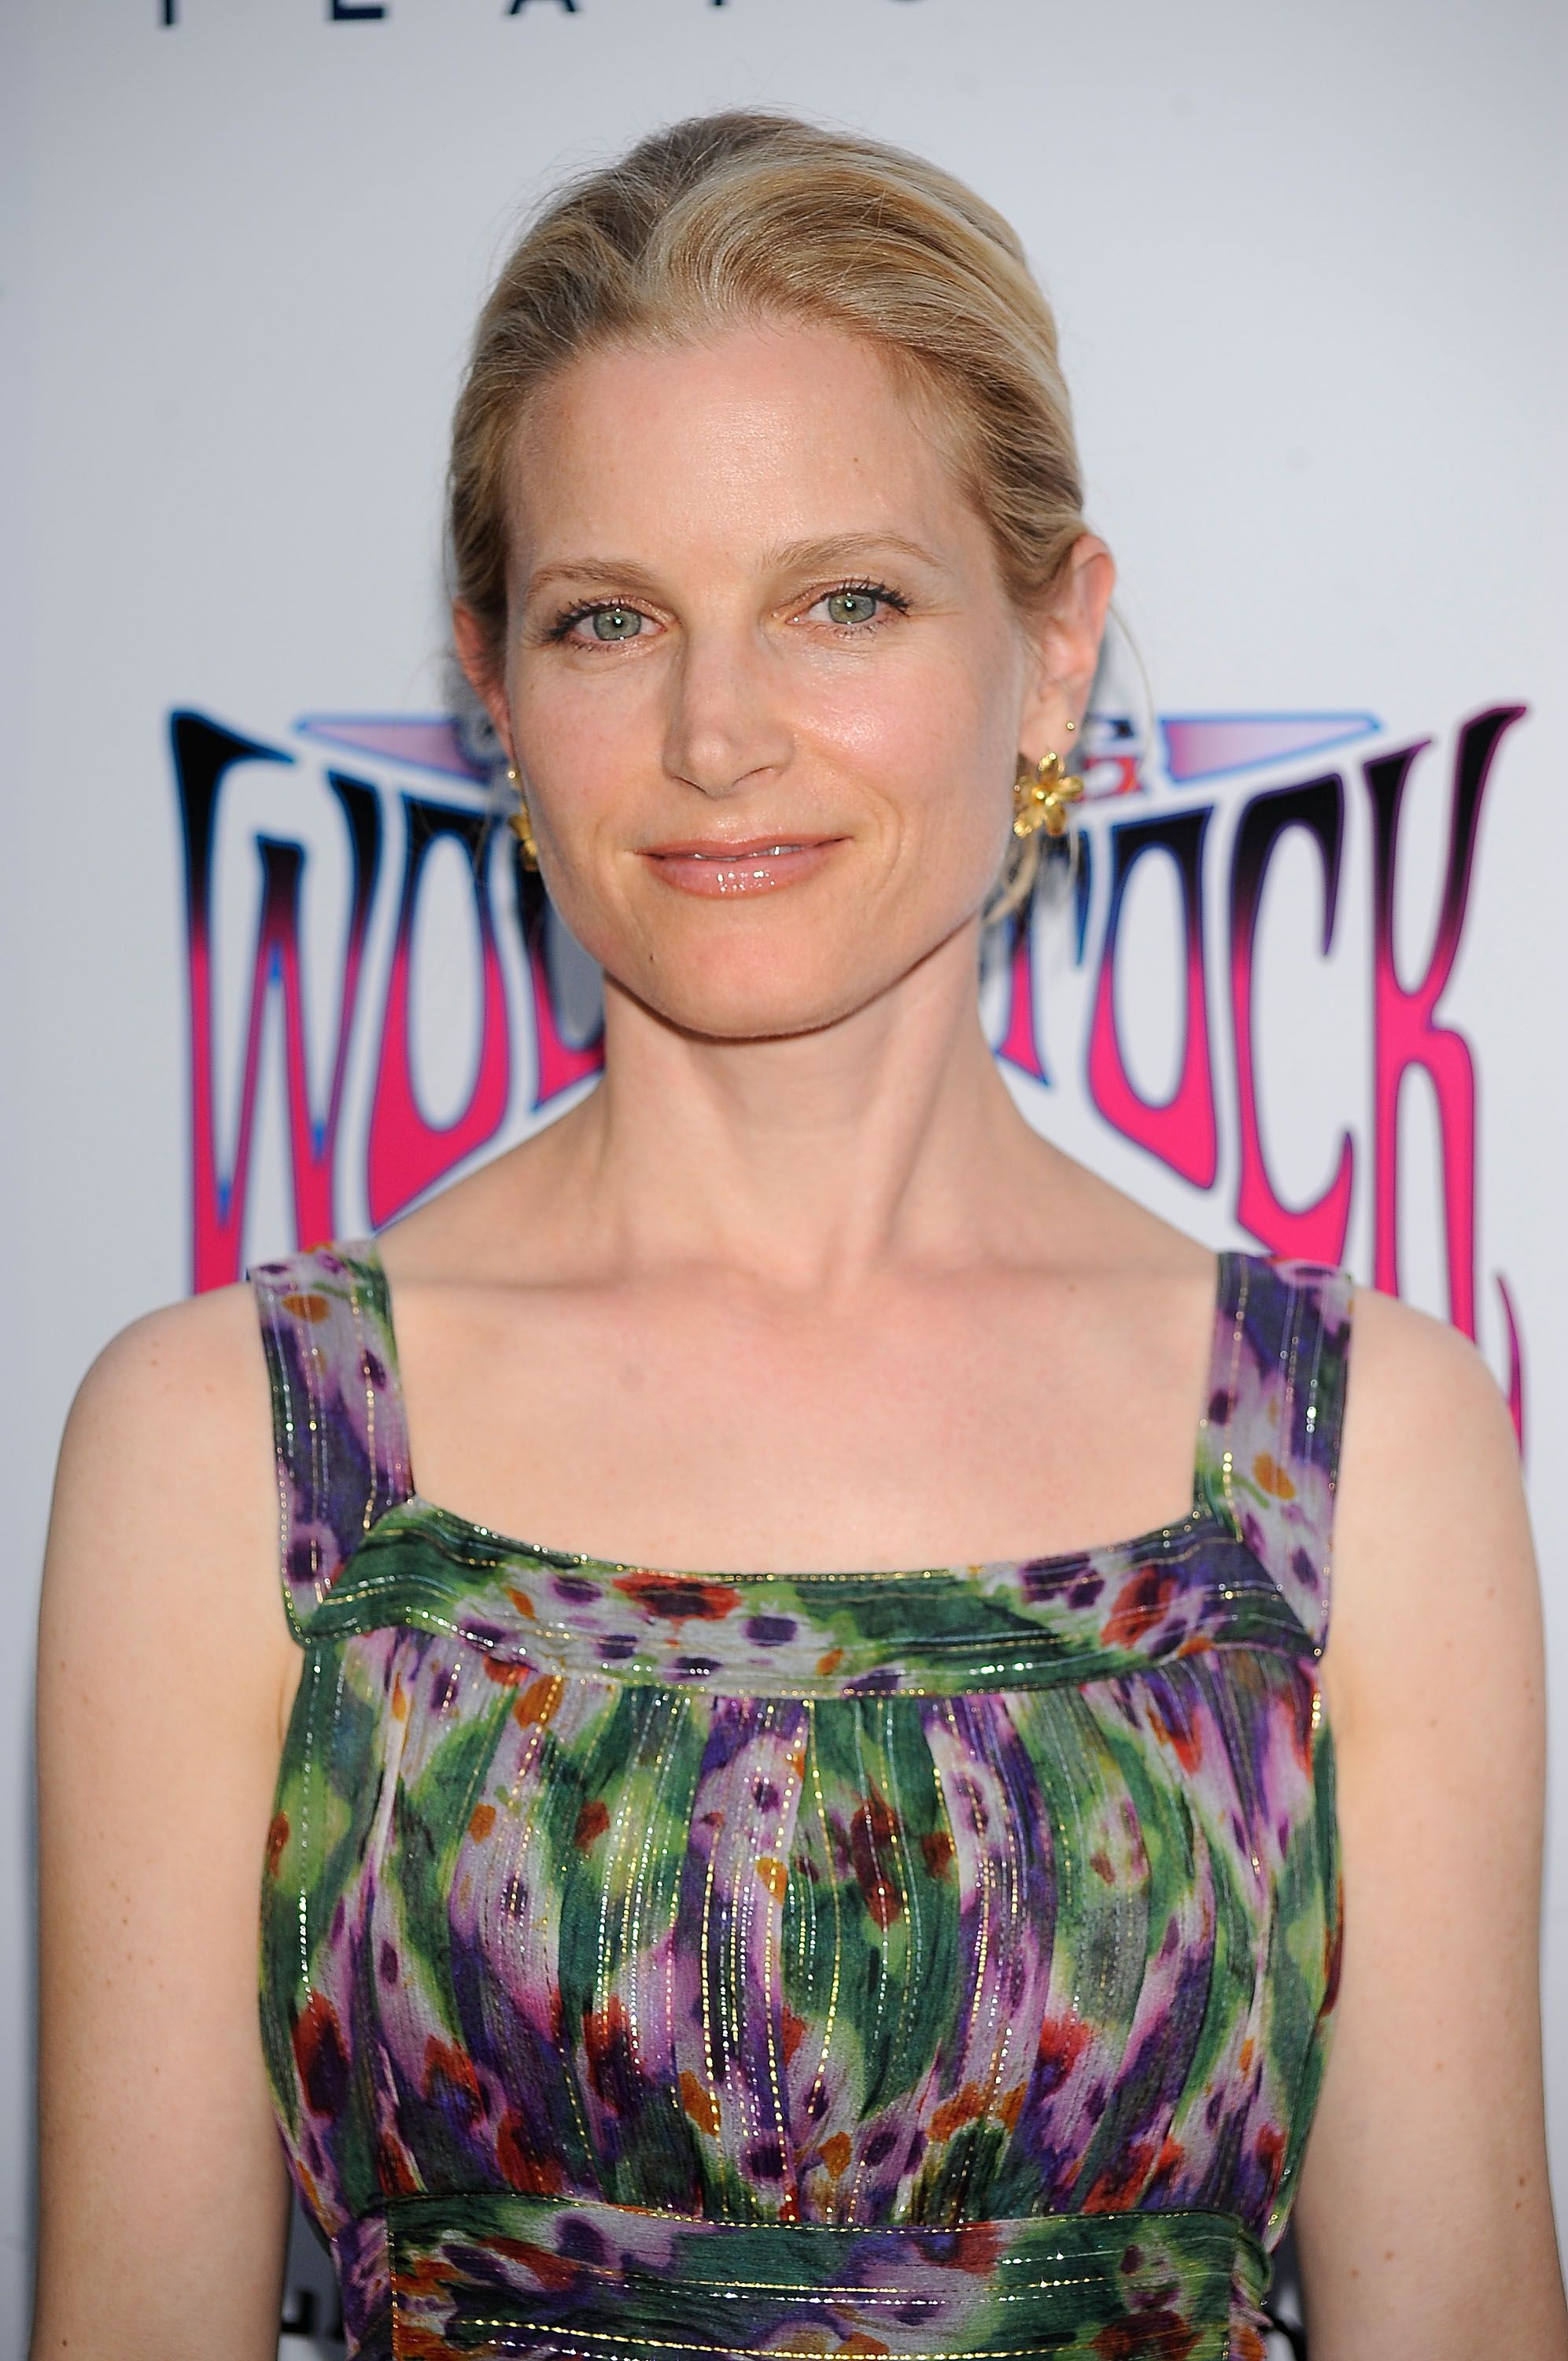  Actress Bridget Fonda at a screening of "Taking Woodstock" in 2009 in Los Angeles, California | Source: Getty Images